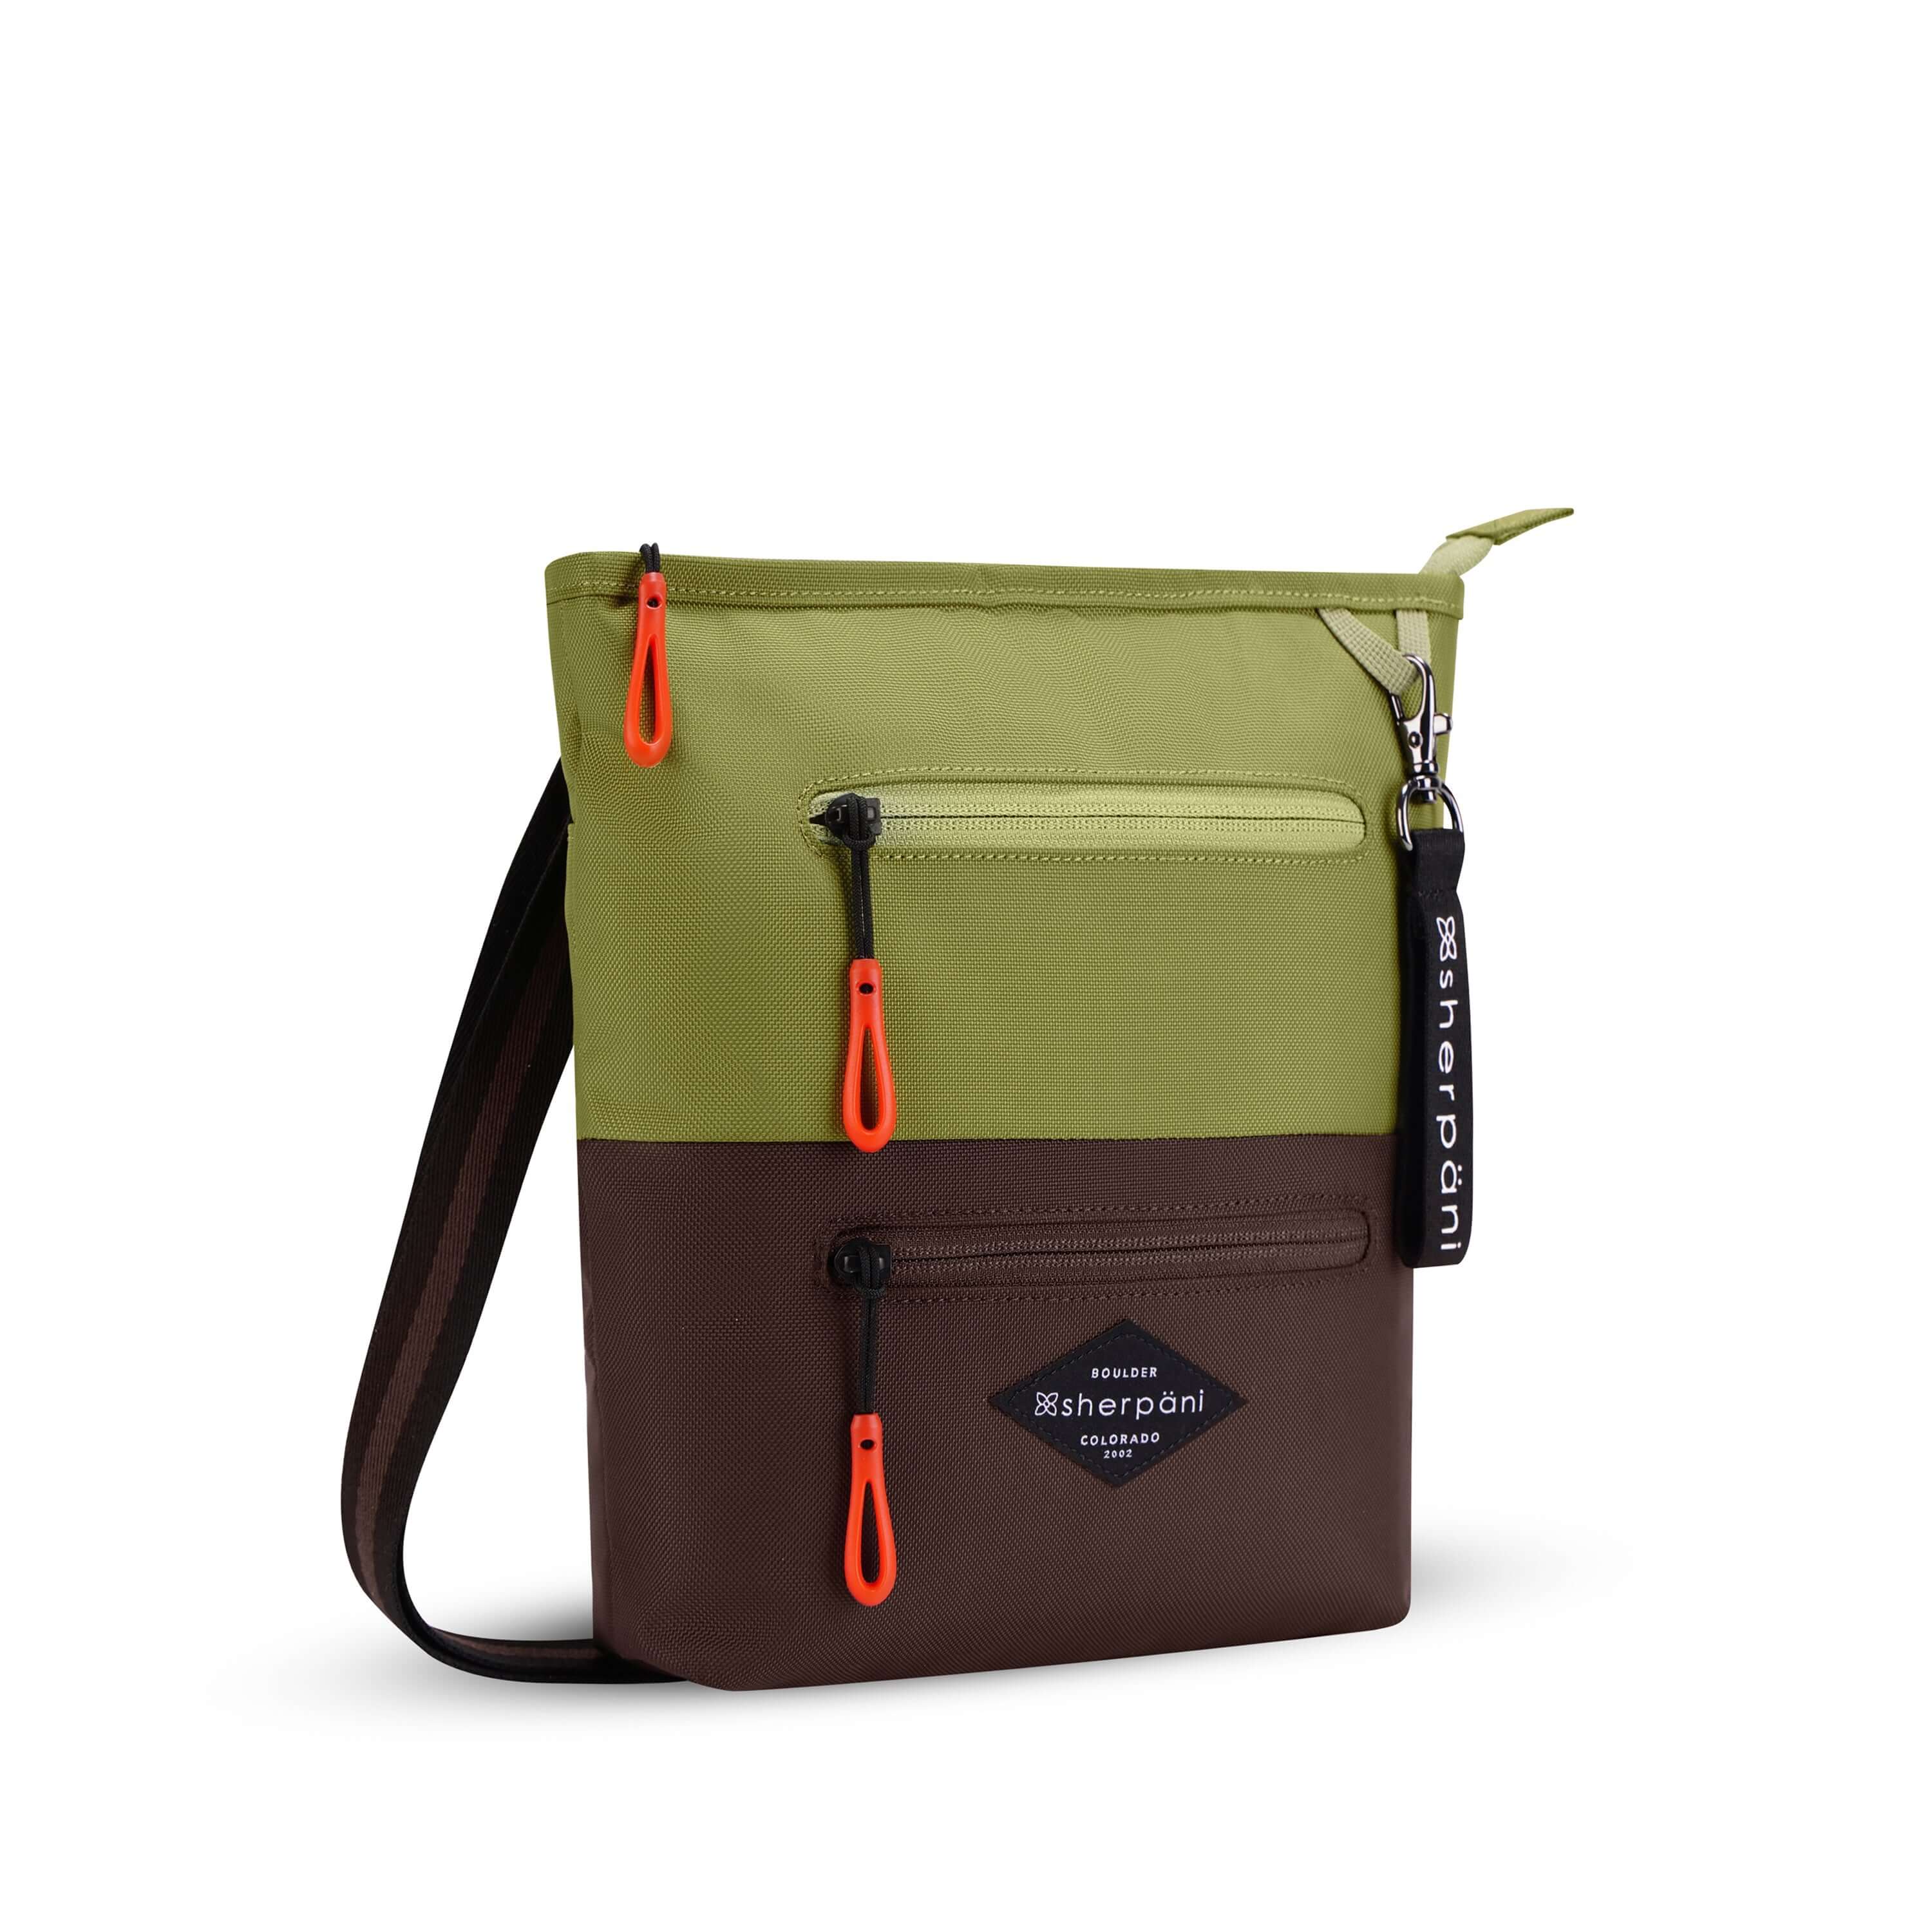 Angled front view of Sherpani's crossbody, the Sadie, in Cactus. The top half of the bag is green and the bottom half is brown. It features two exterior zipper pockets on the front panel with easy-pull zippers accented in red. A Sherpani branded keychain is attached to a fabric loop in the upper right corner. It has an adjustable crossbody strap. 